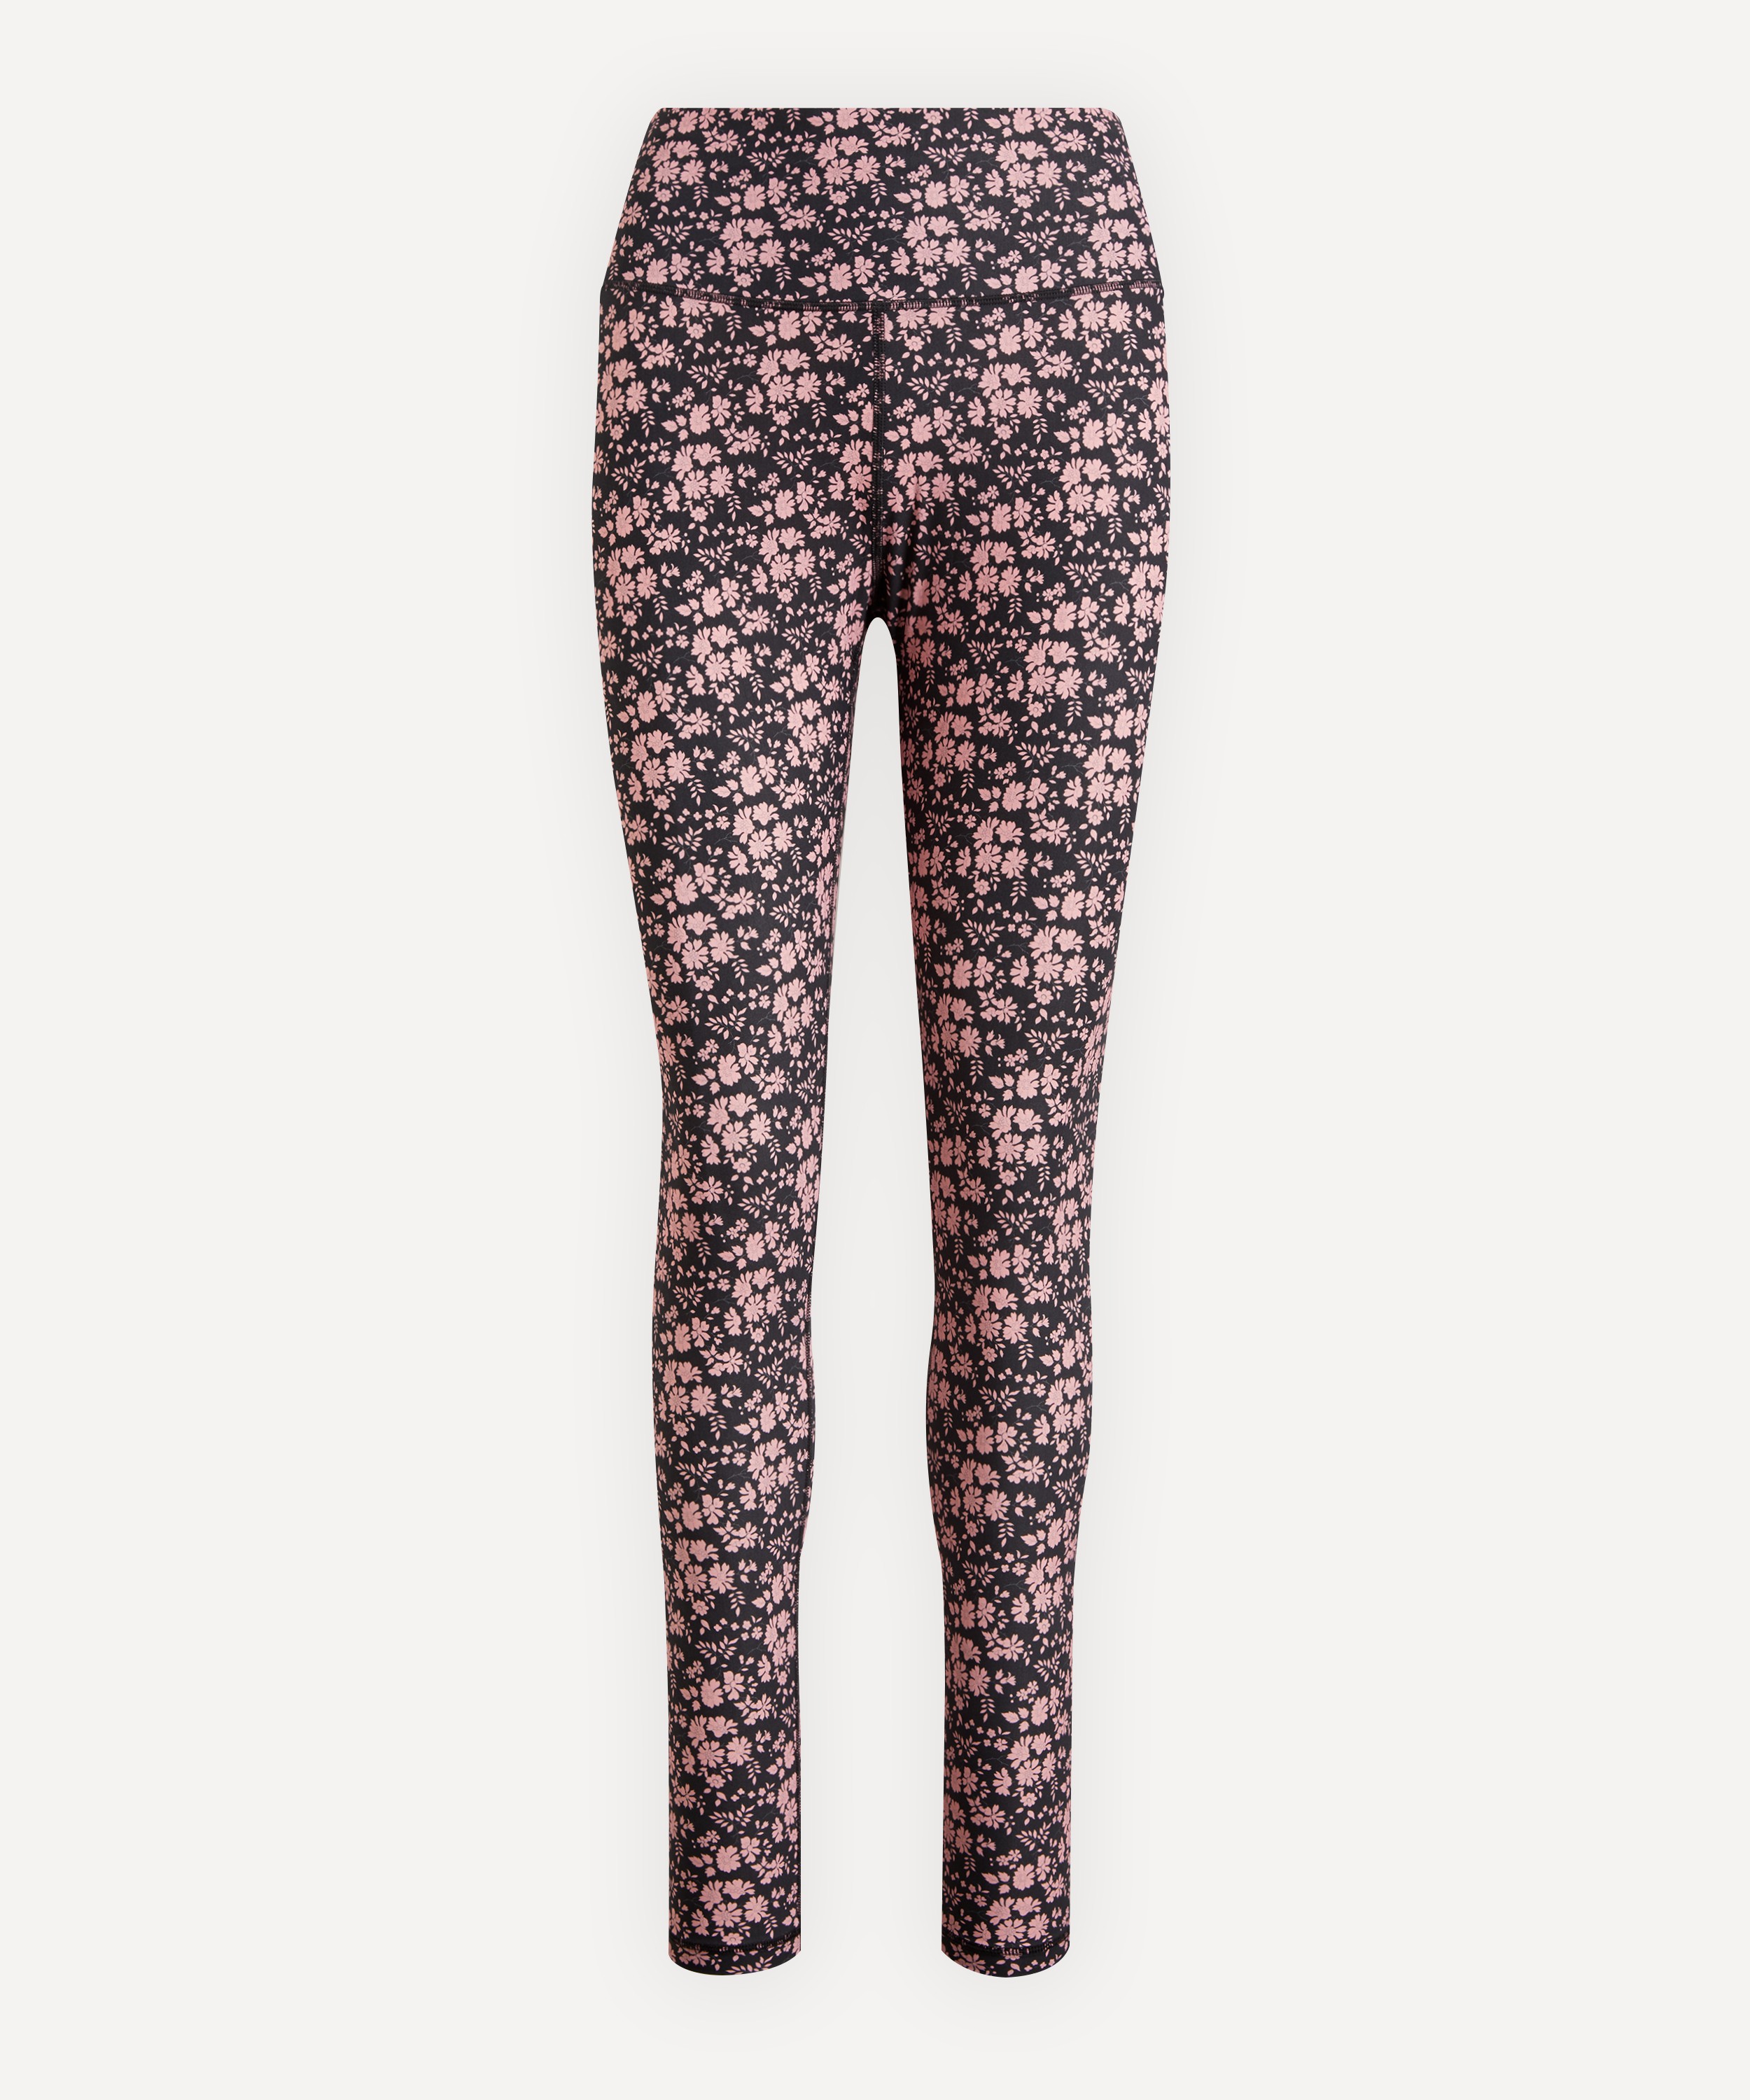 Liberty - Capel Printed Stretch Leggings image number null